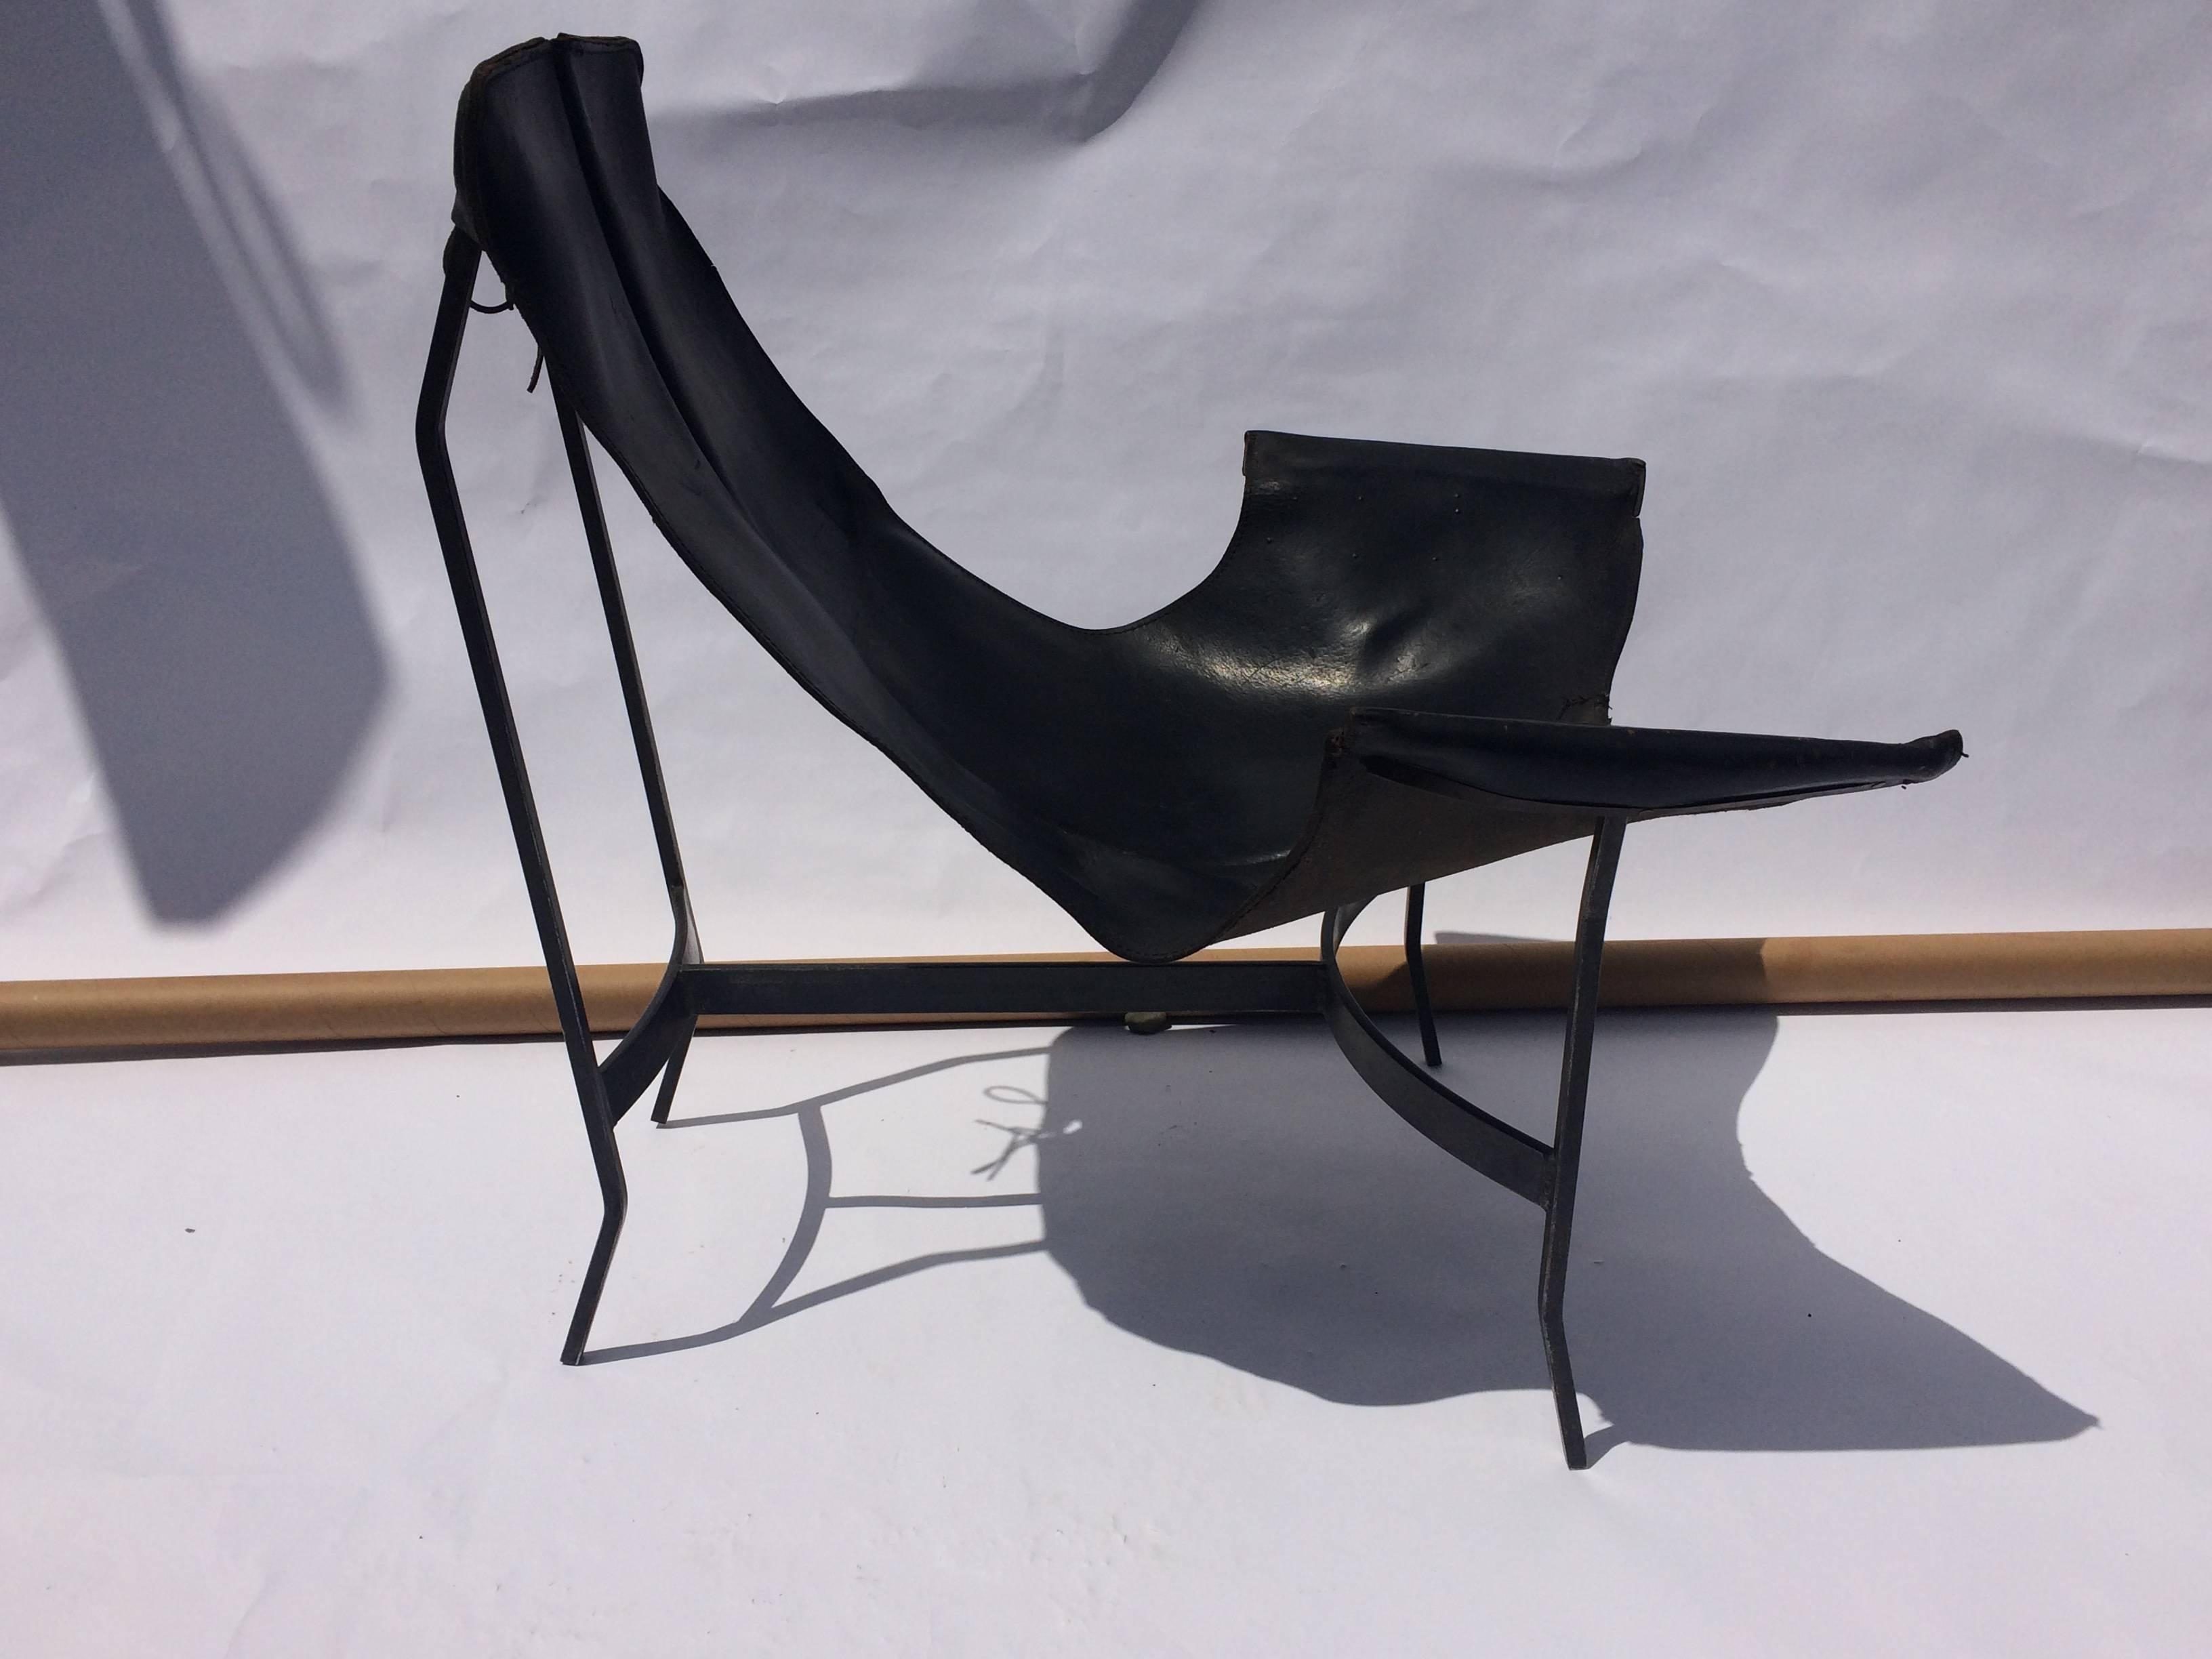 Leather Sling Chair by William Katavolos for Leathercrafter 1